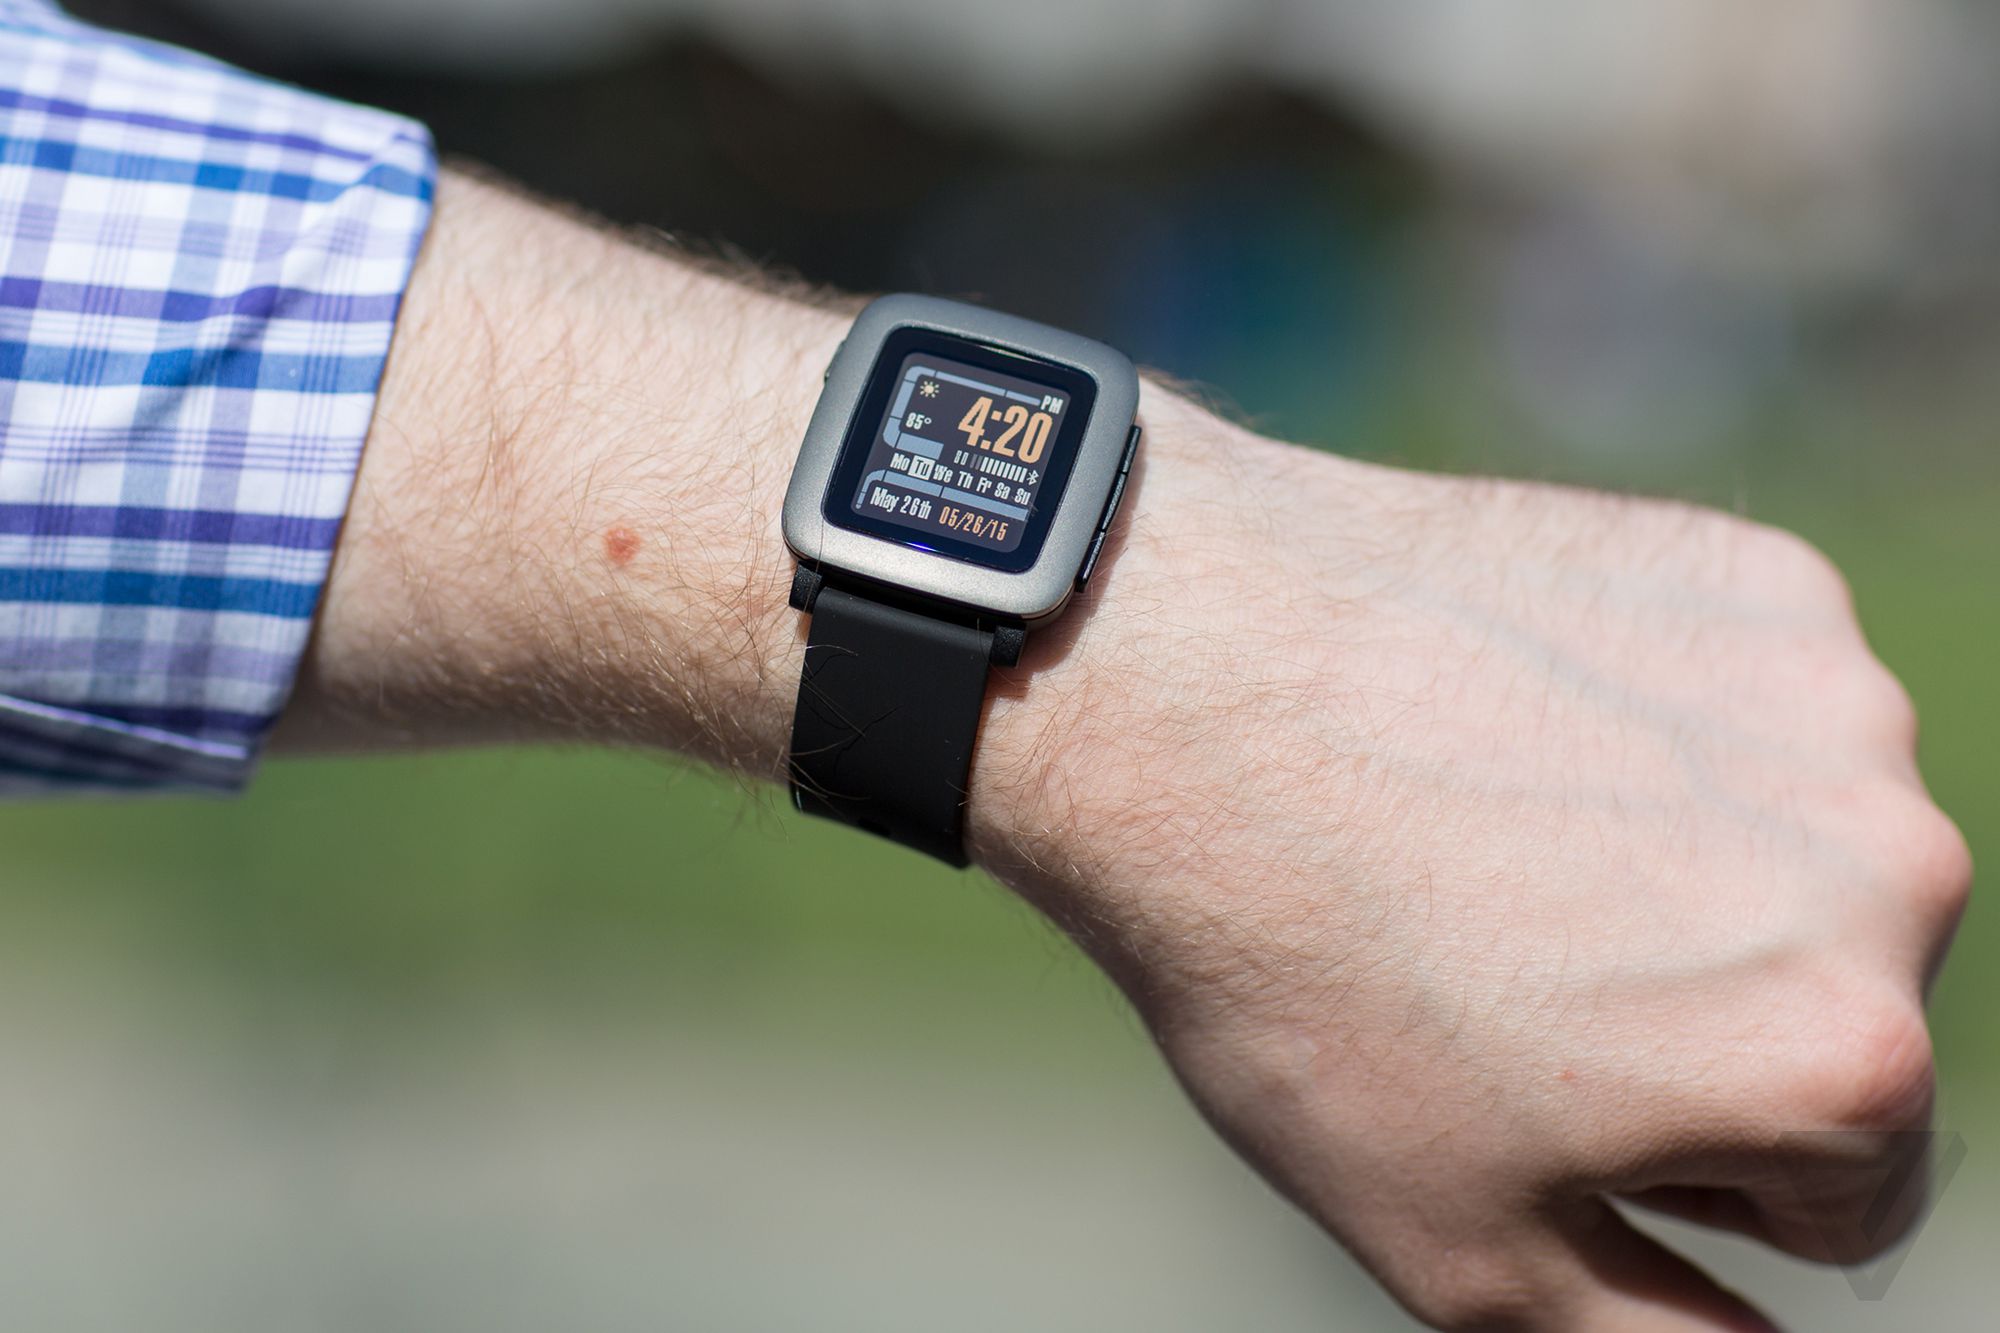 pebble-smartwatch-pricing-exploring-the-cost-of-pebble-smartwatches